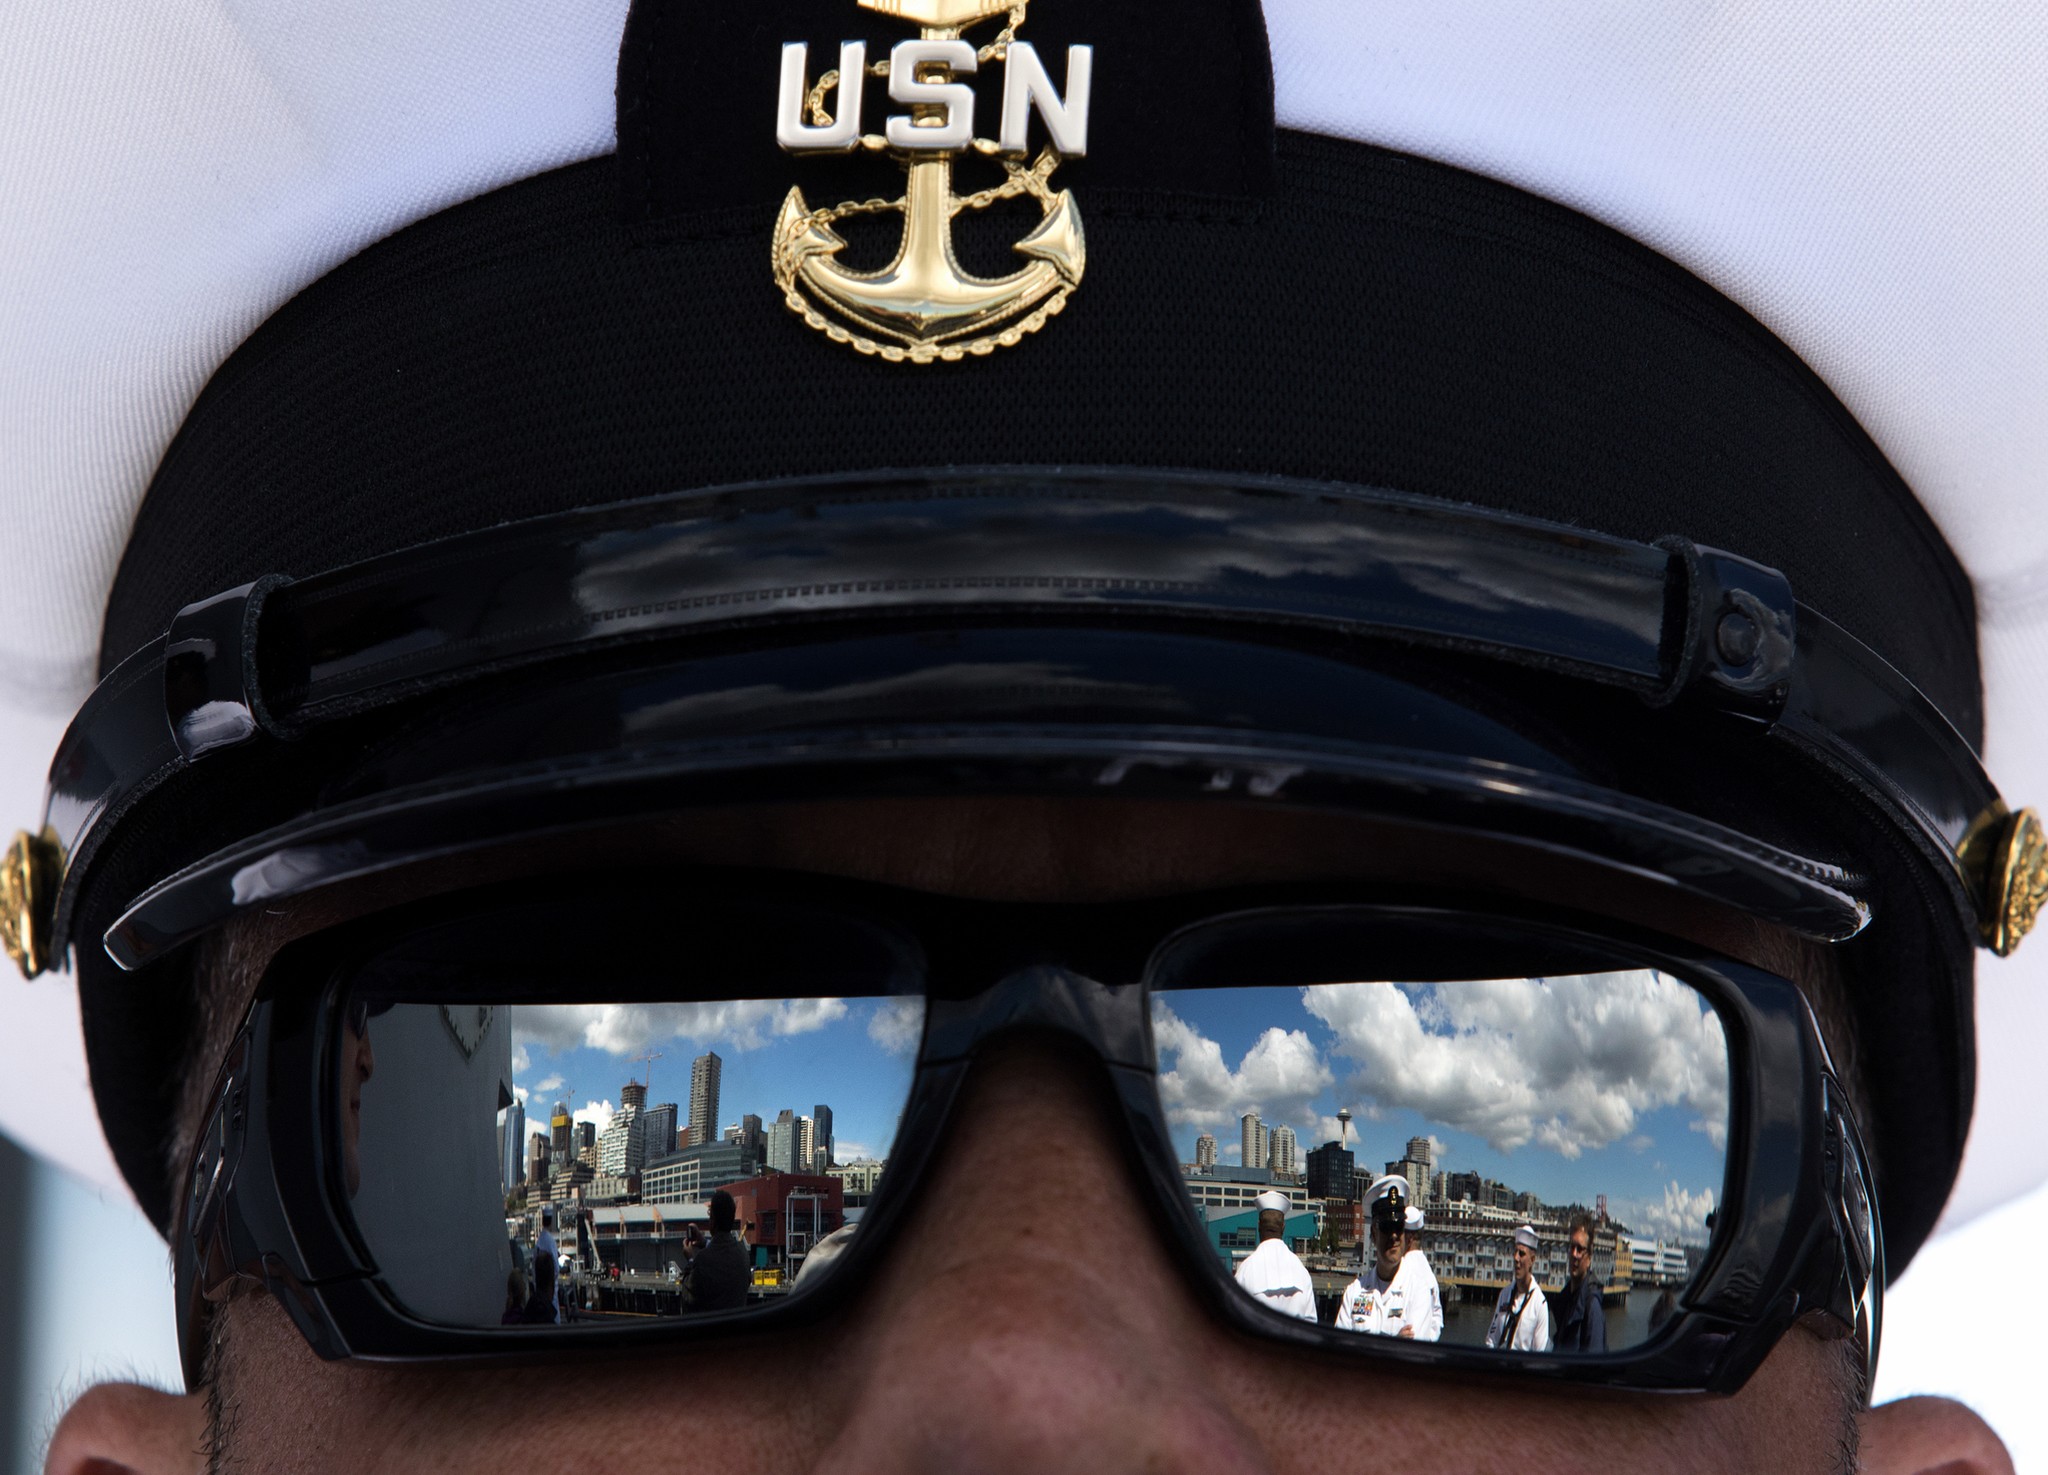 Seattle is reflected in the sunglasses of Chief Scott Altis as the USS Gridley, the newest guided missile destroyer to be based at Naval Station Everett, docks in Seattle for Seafair on Tuesday in Seattle, Wa. (Andy Bronson / The Herald)